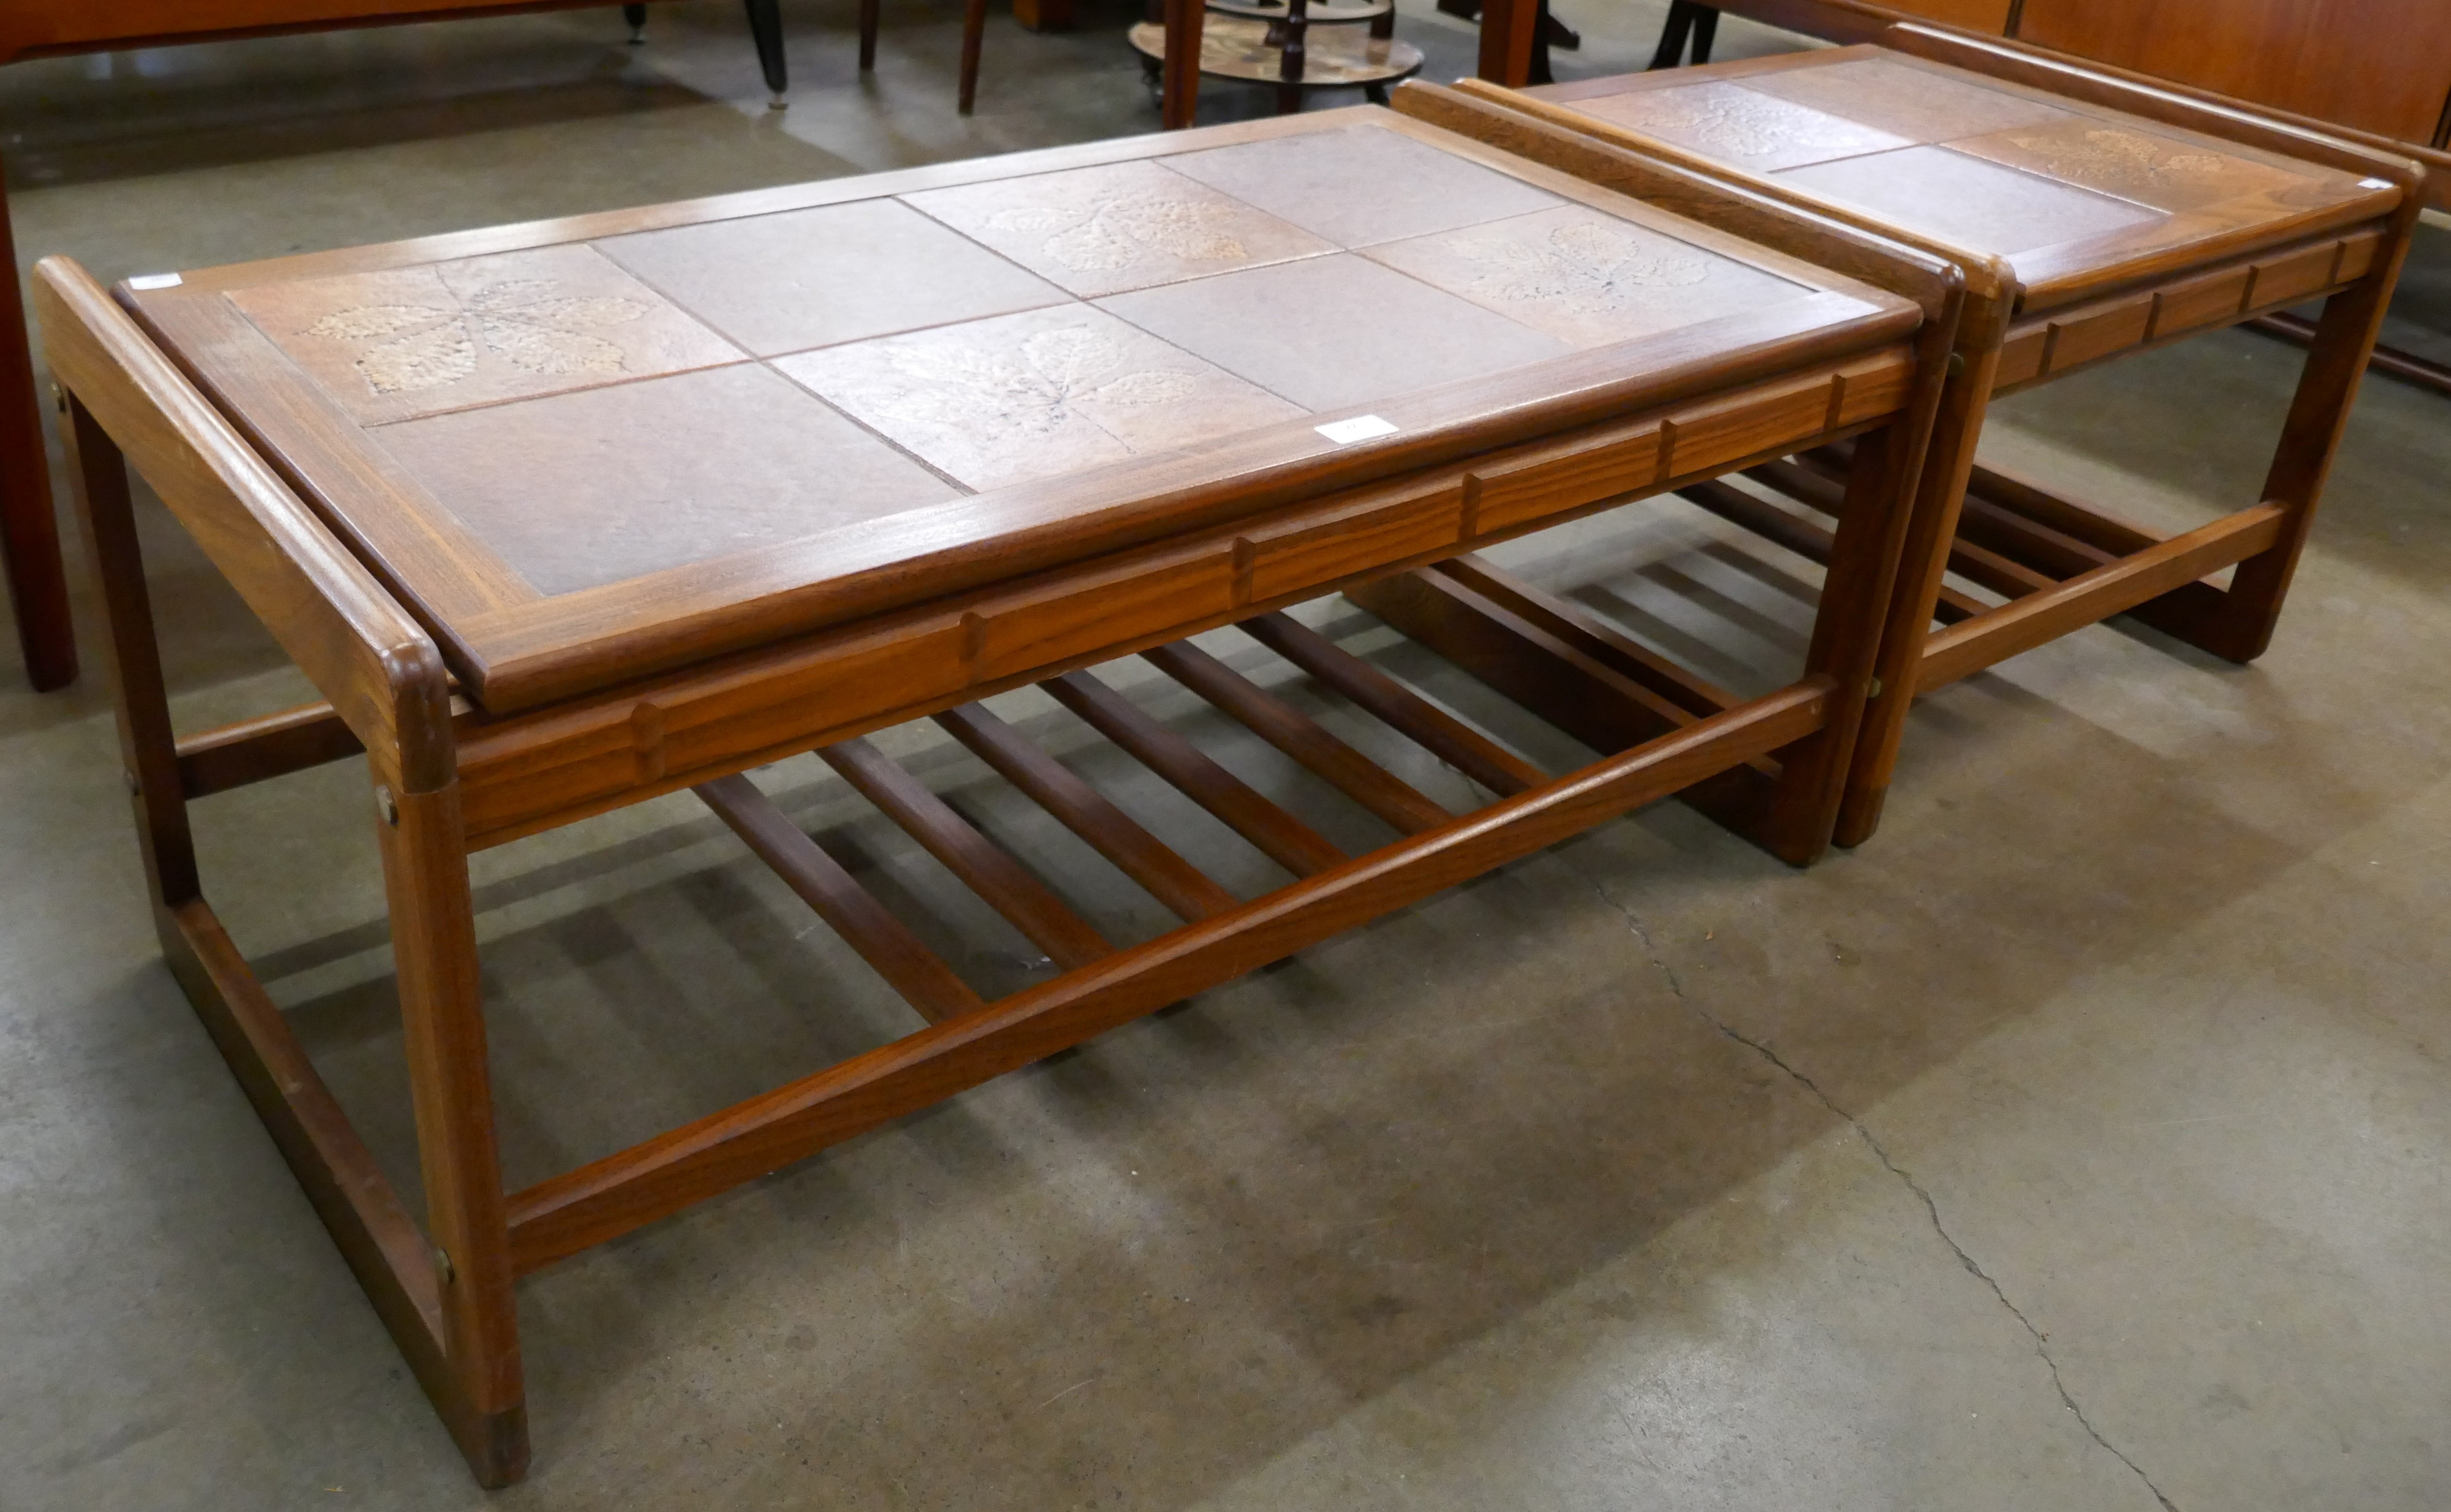 Two teak and tiled topped coffee tables